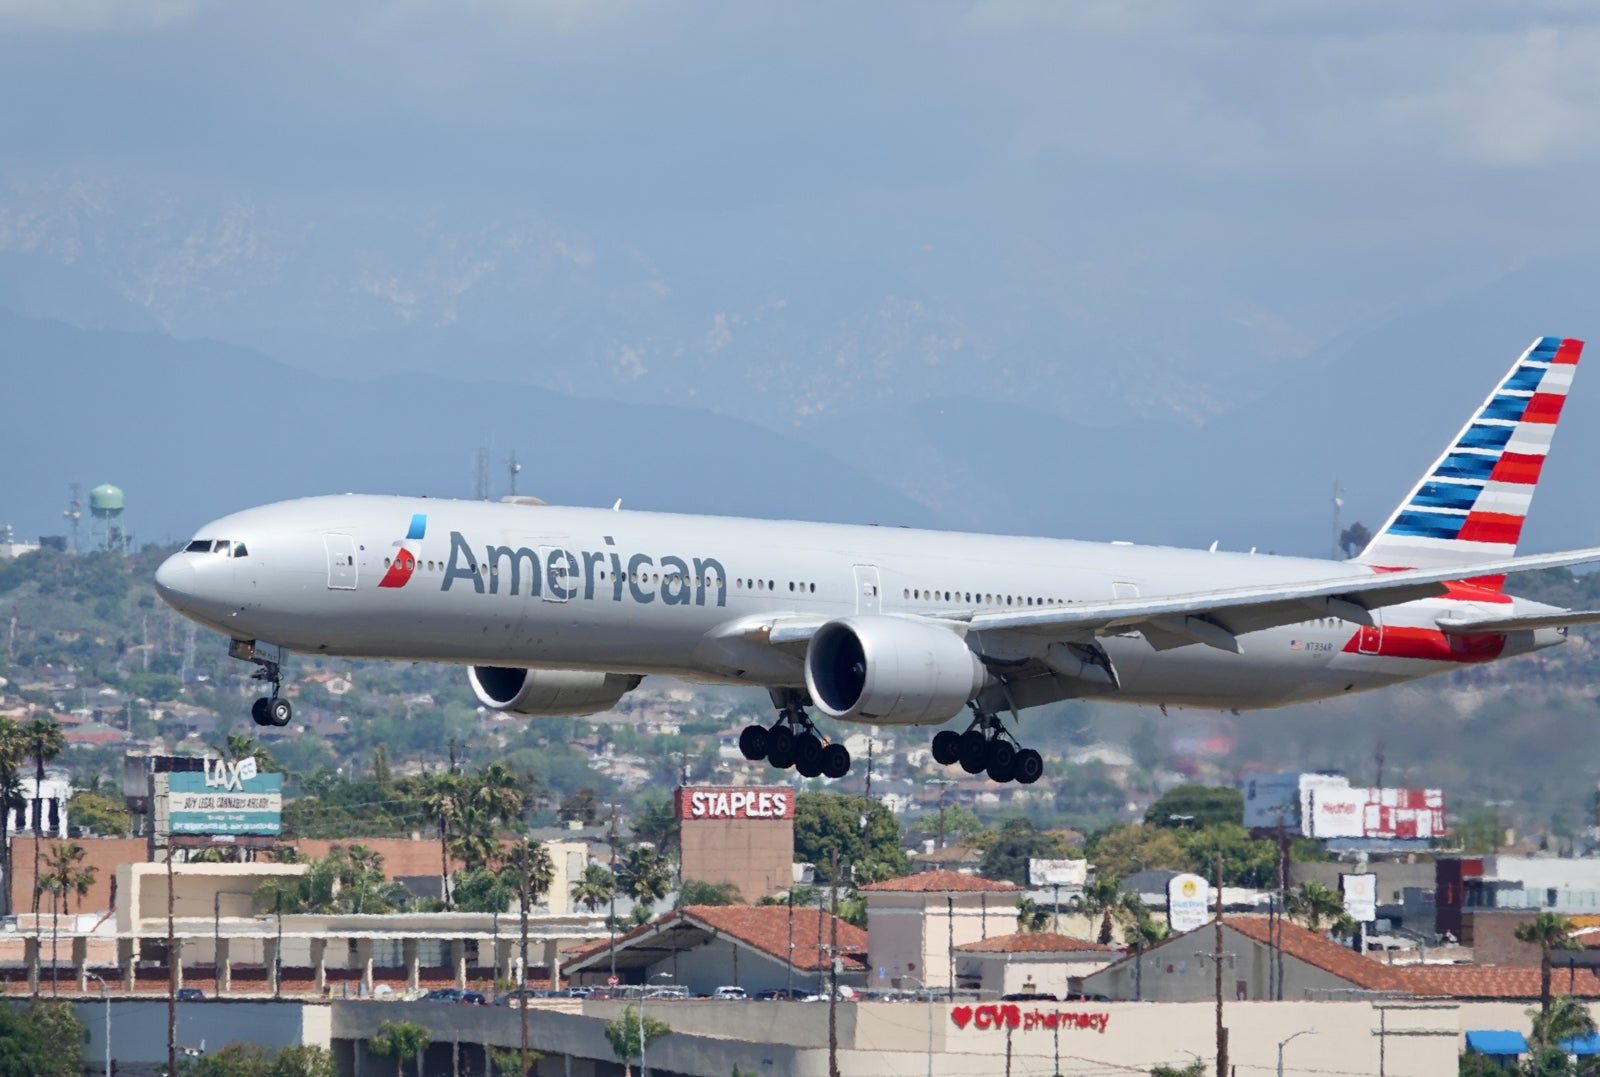 American Airlines Boeing 777-300ER LAX